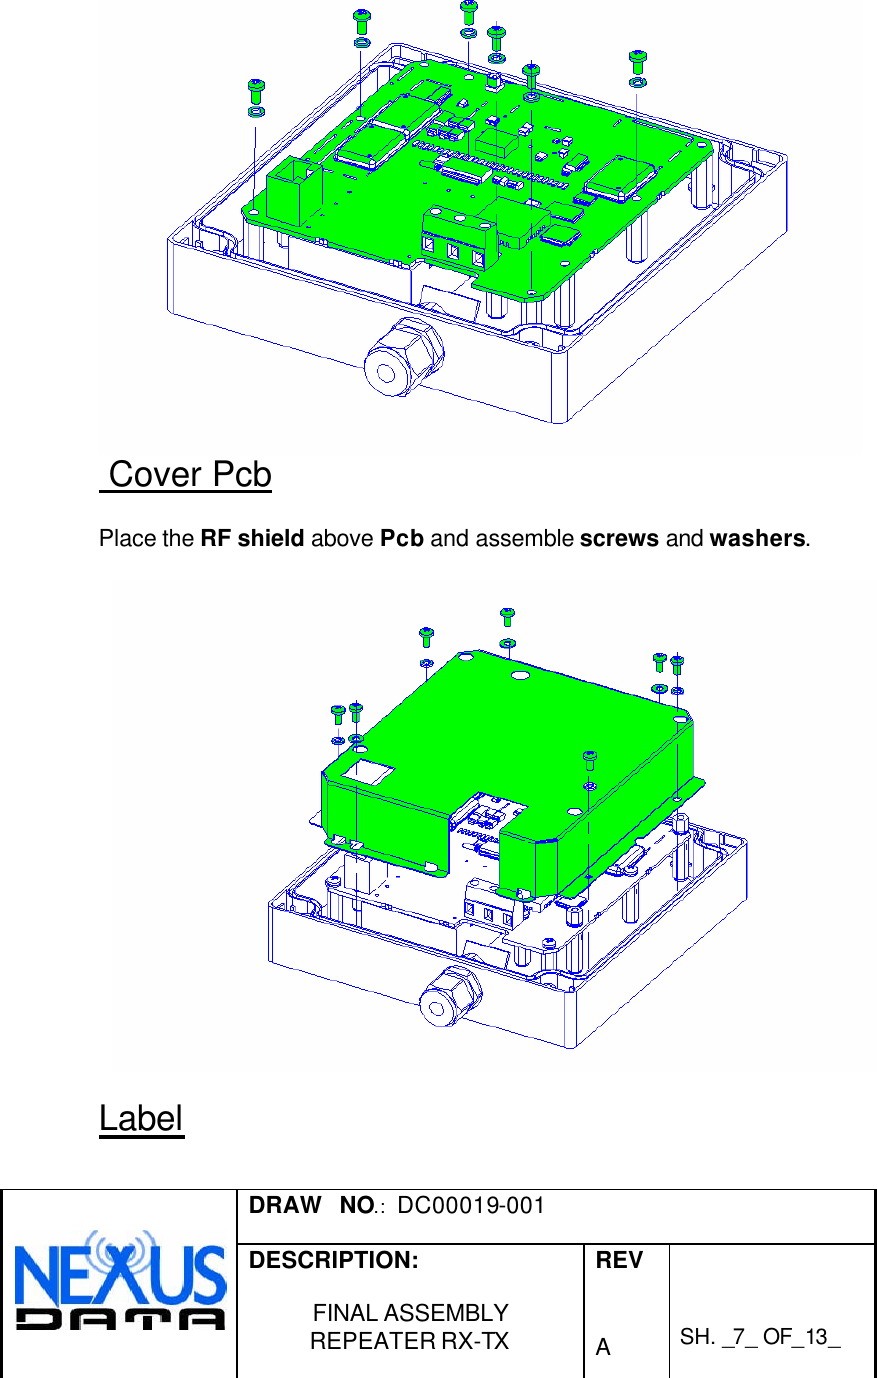  DRAW   NO.:  DC00019-001   DESCRIPTION:  FINAL ASSEMBLY REPEATER RX-TX  REV   A    SH. _7_ OF_13_     Cover Pcb  Place the RF shield above Pcb and assemble screws and washers.    Label  